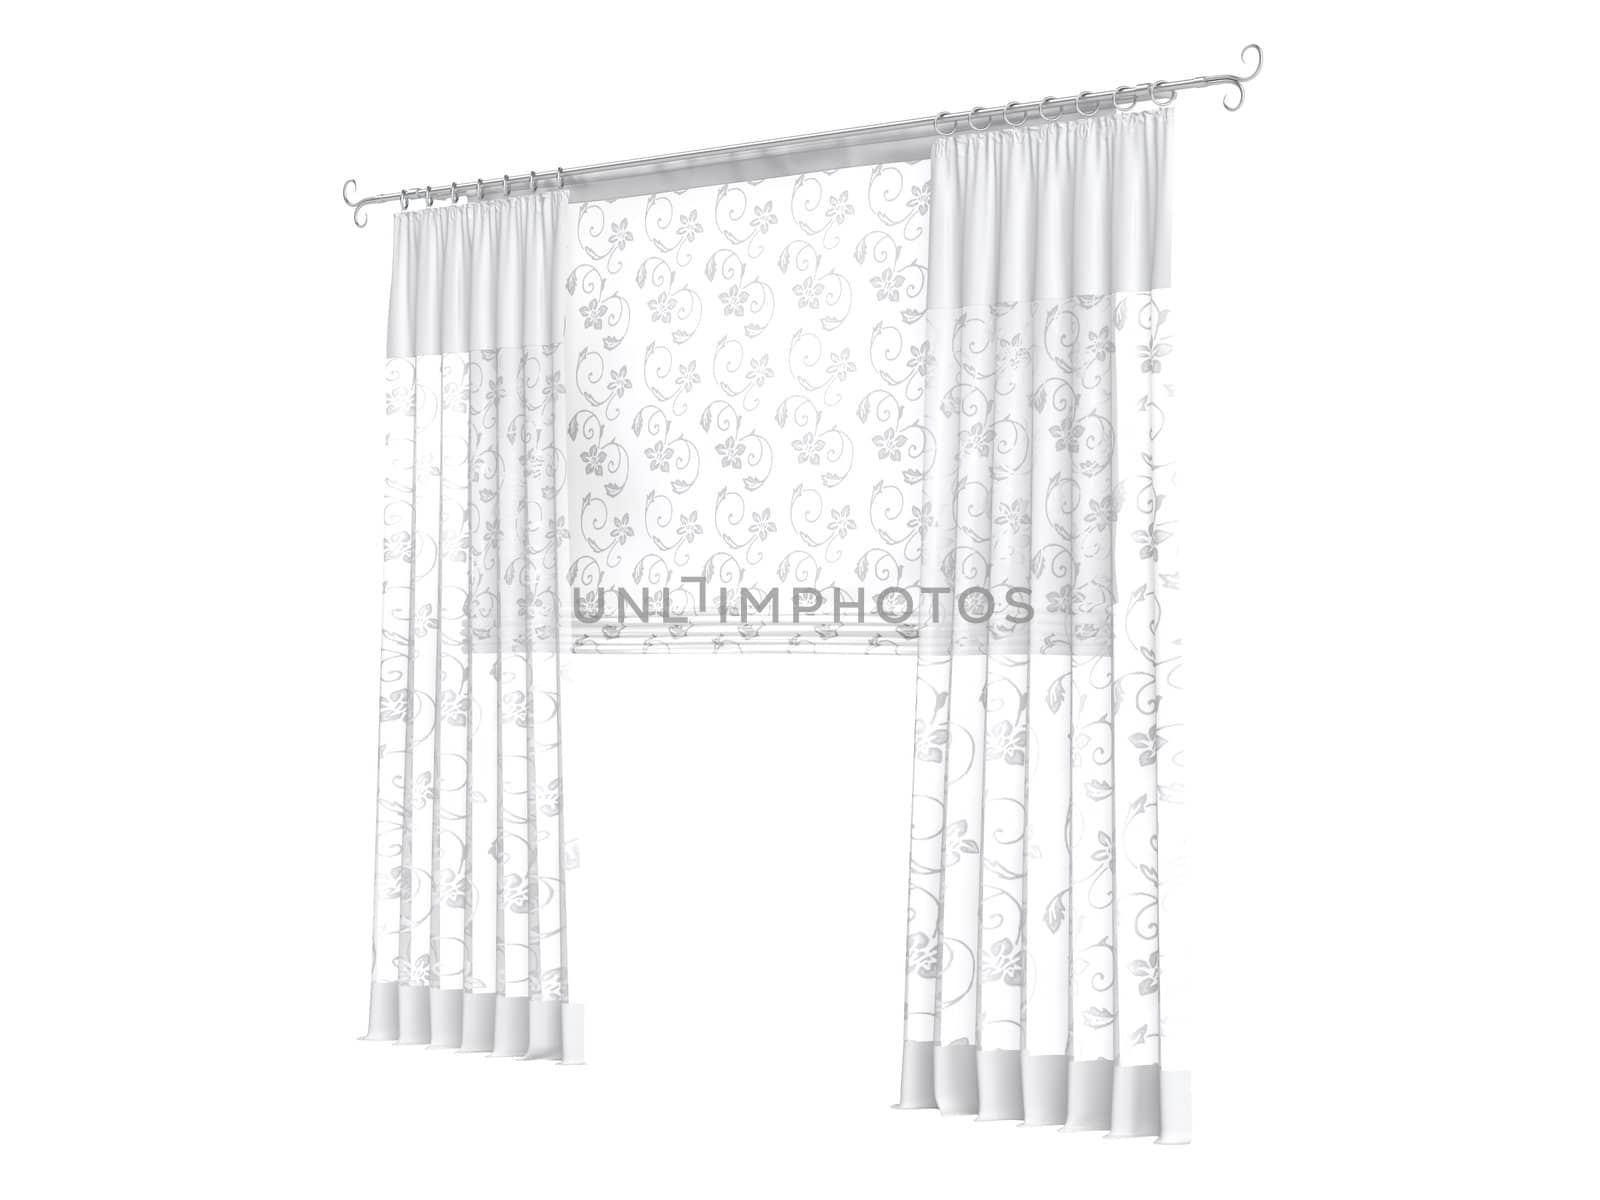 Curtains isolated on white background